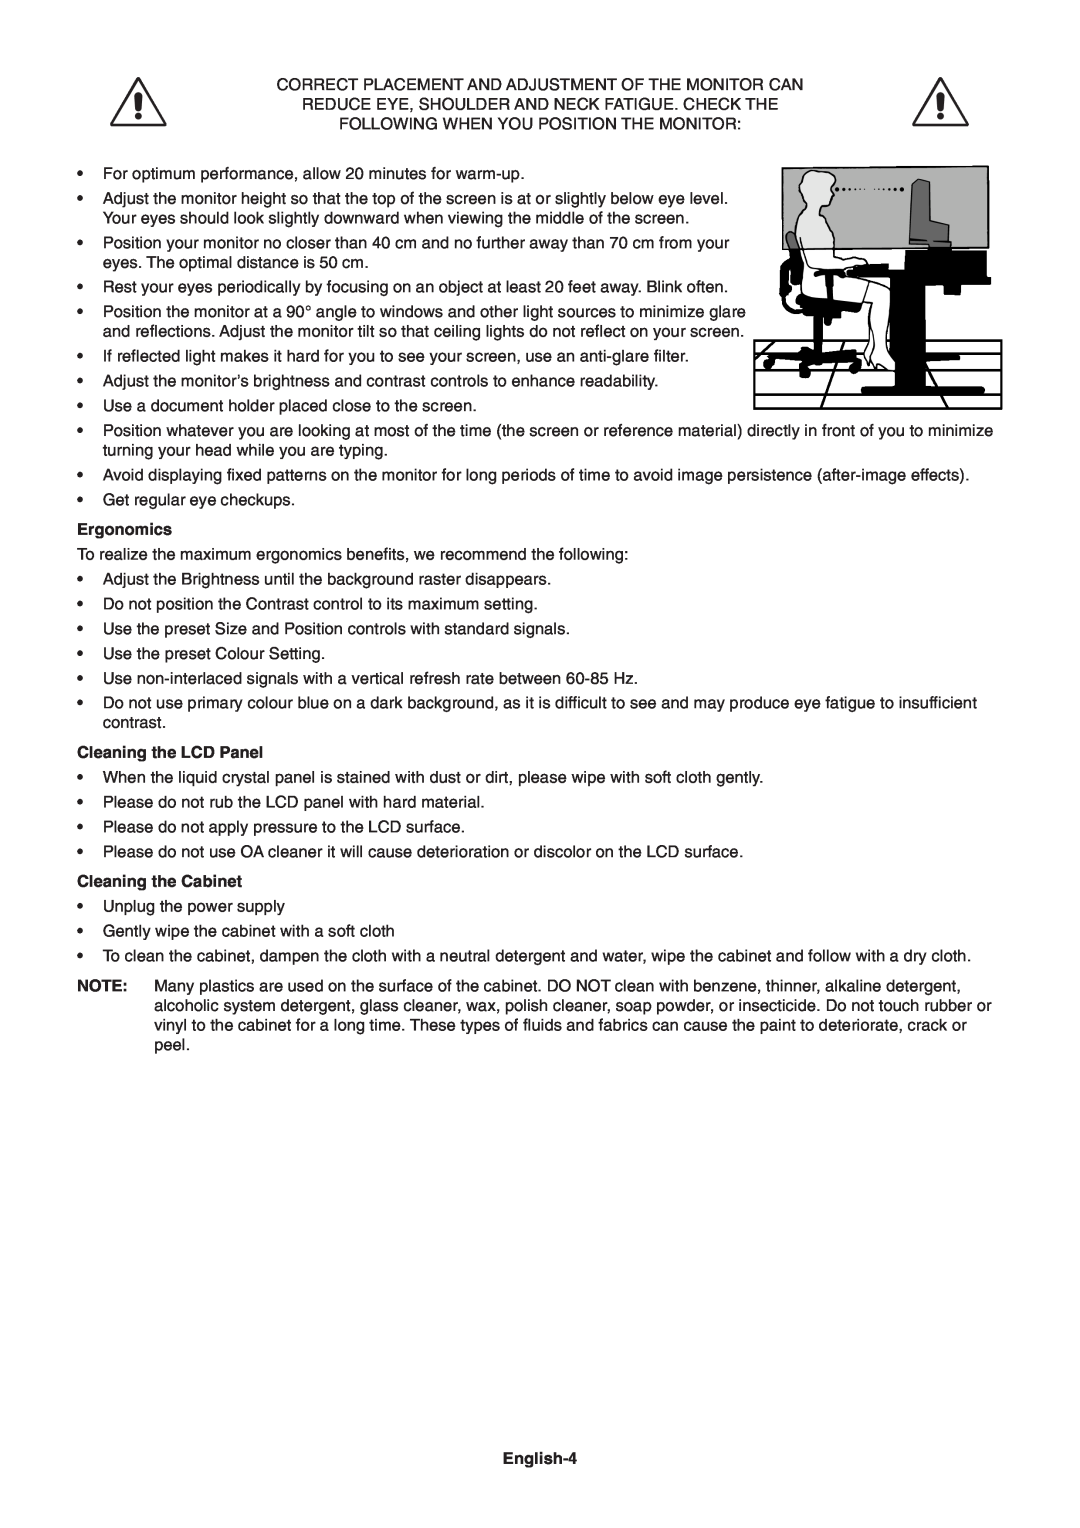 NEC EA191M-BK user manual Ergonomics, Cleaning the LCD Panel, Cleaning the Cabinet, English-4 